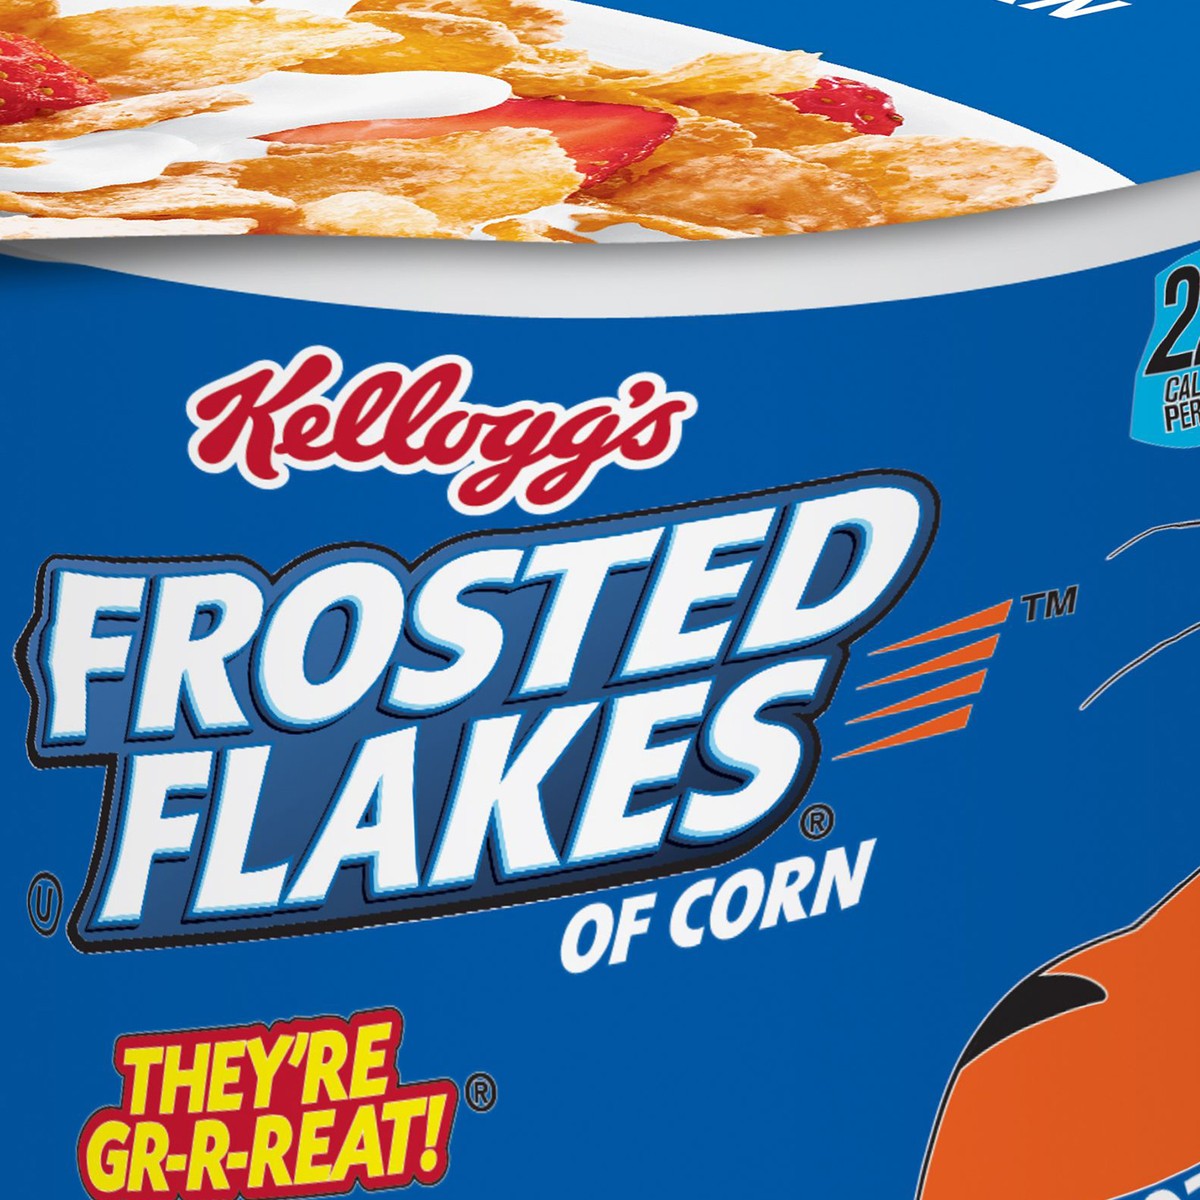 Kelloggs Frosted Flakes Cereal In A Cup 2.1 Oz Pack Of 6 - Office